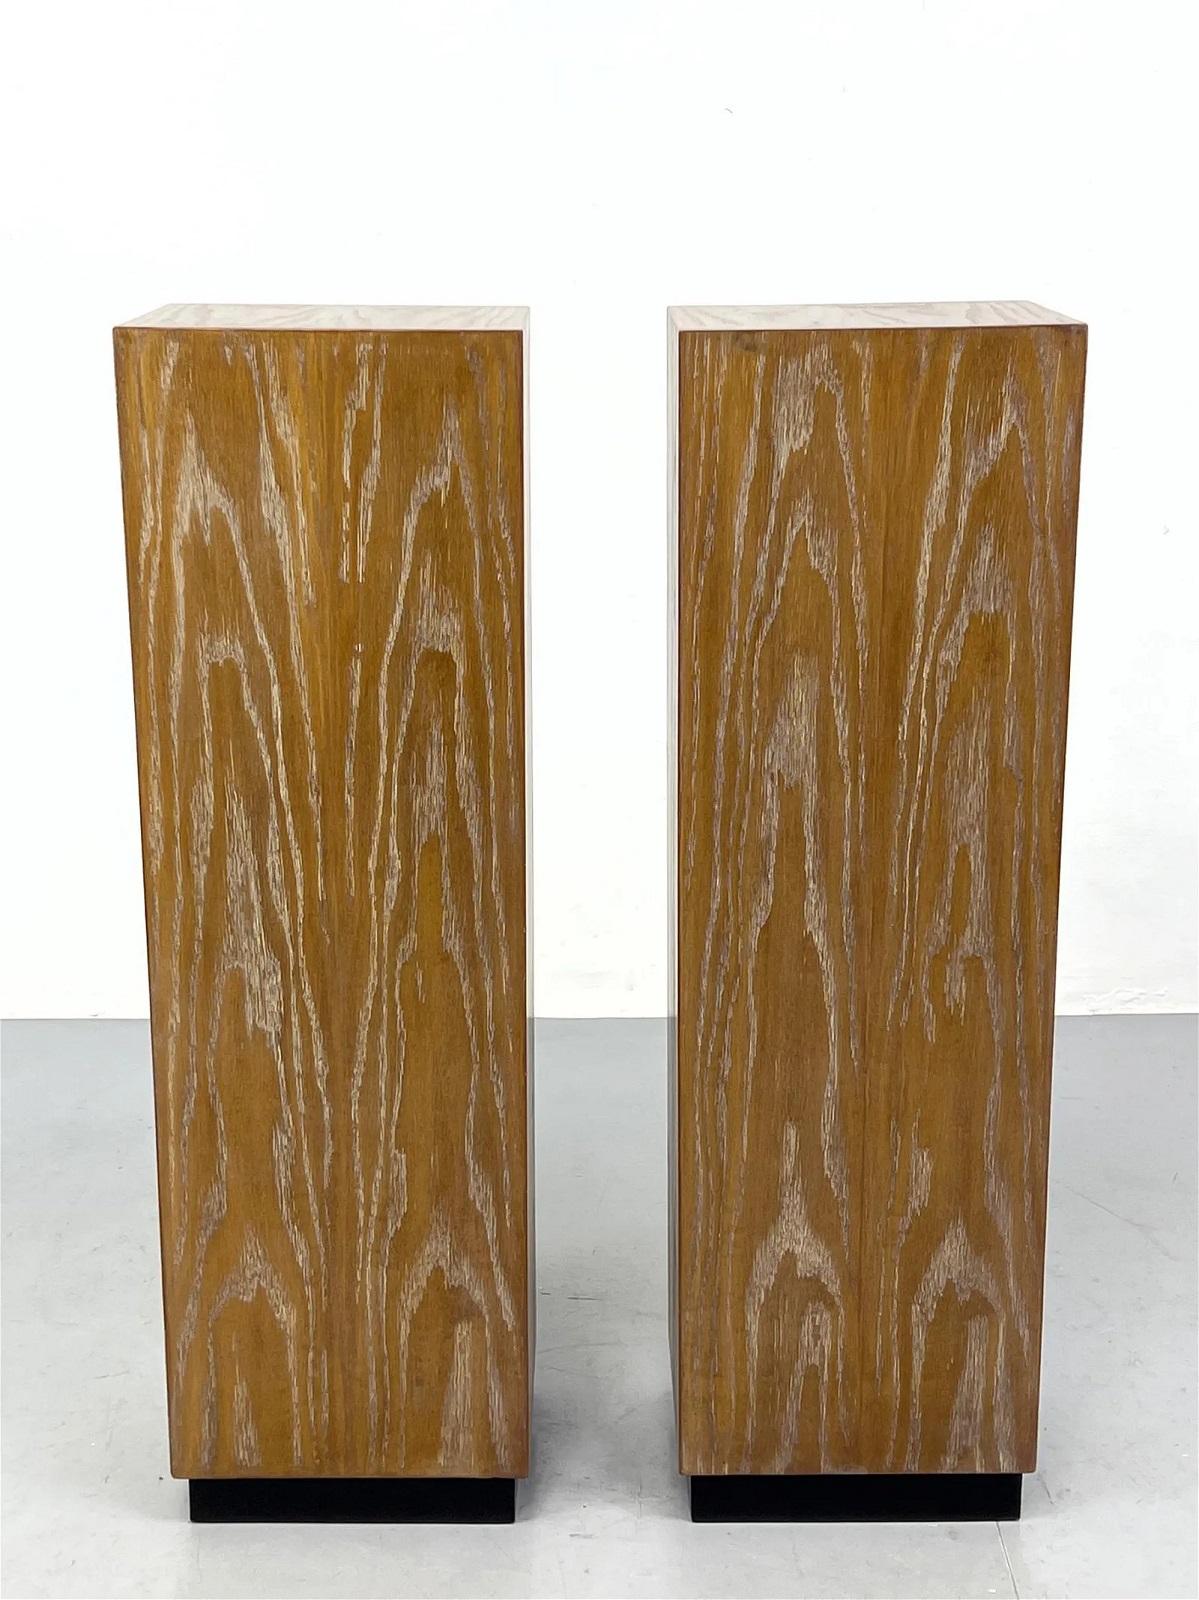 Pair of Mid-Century Modern cerused oak pedestals. Each pedestal has black lacquered bases.